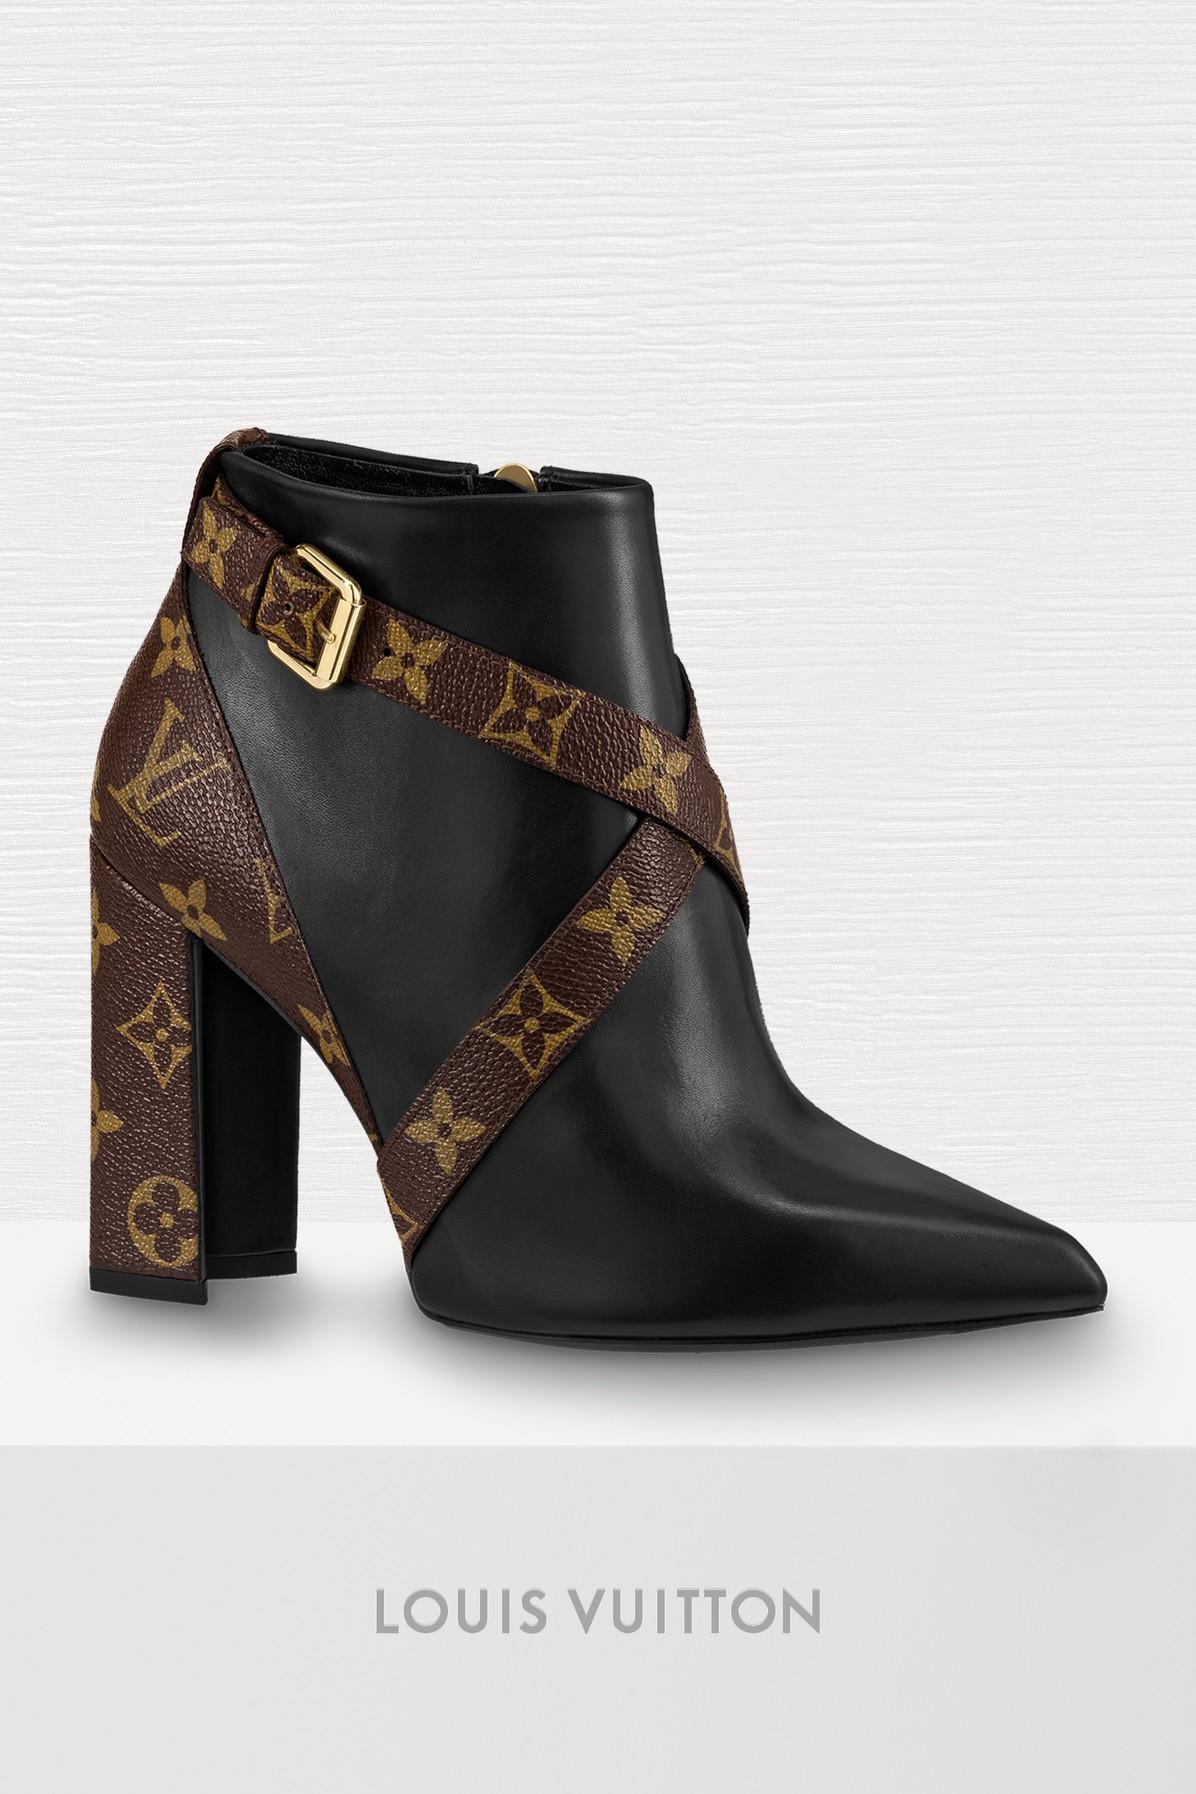 louis vuitton leather ankle boots